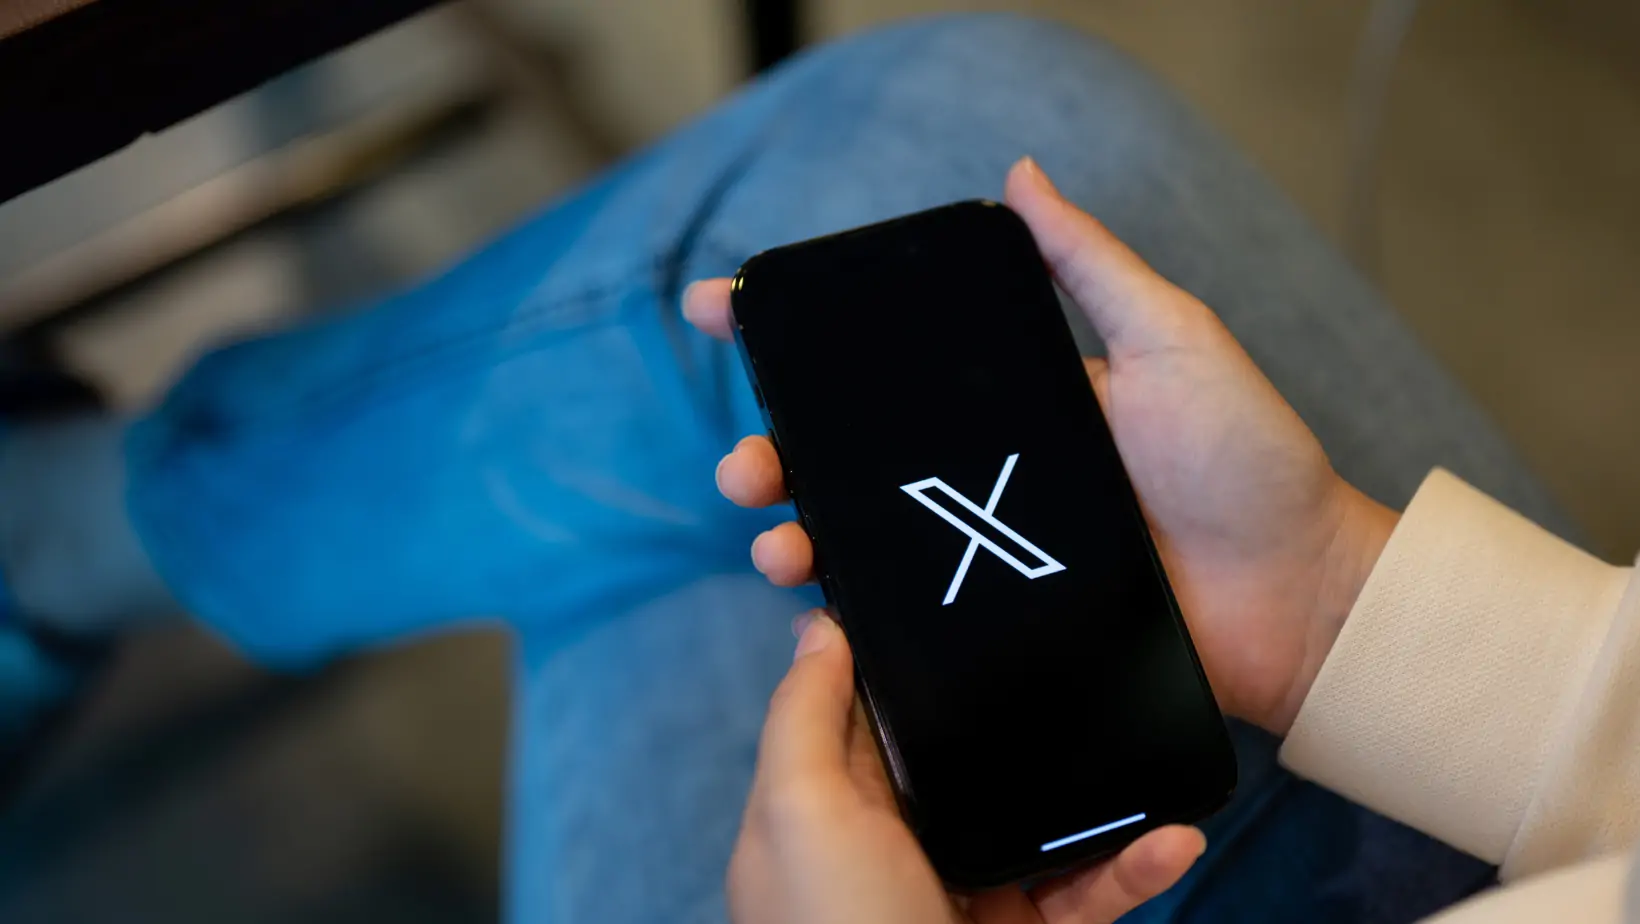 X Introduces Video Feature to Spaces: Hosts Can Now Turn On Cameras